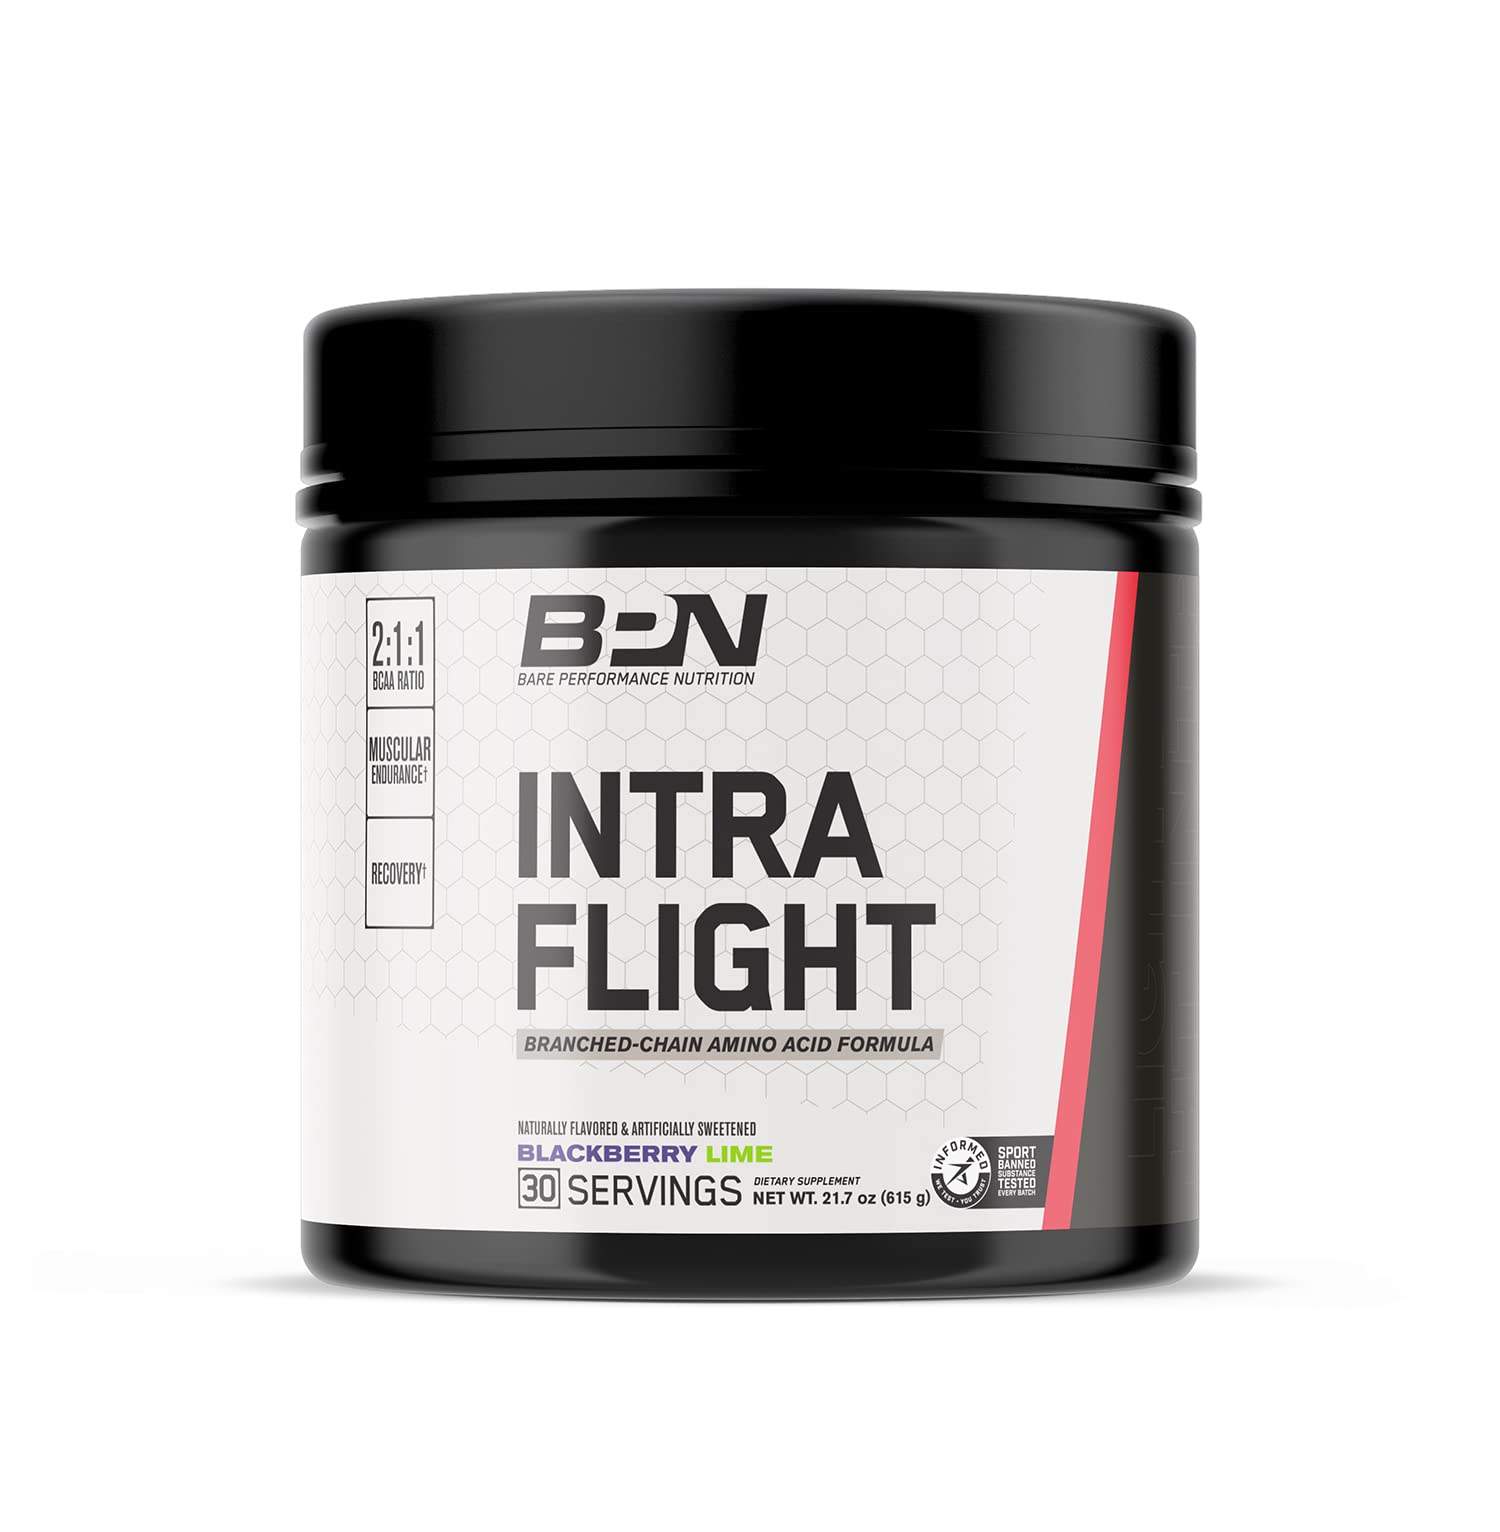 BARE PERFORMANCE NUTRITION Intra-Flight, Branch Chain Amino Acids, Ultimate Endurance Supplement, Increase Endurance and Stamina, 2:1:1 BCAA + Recovery (30 Servings, BlackBerry Lime)